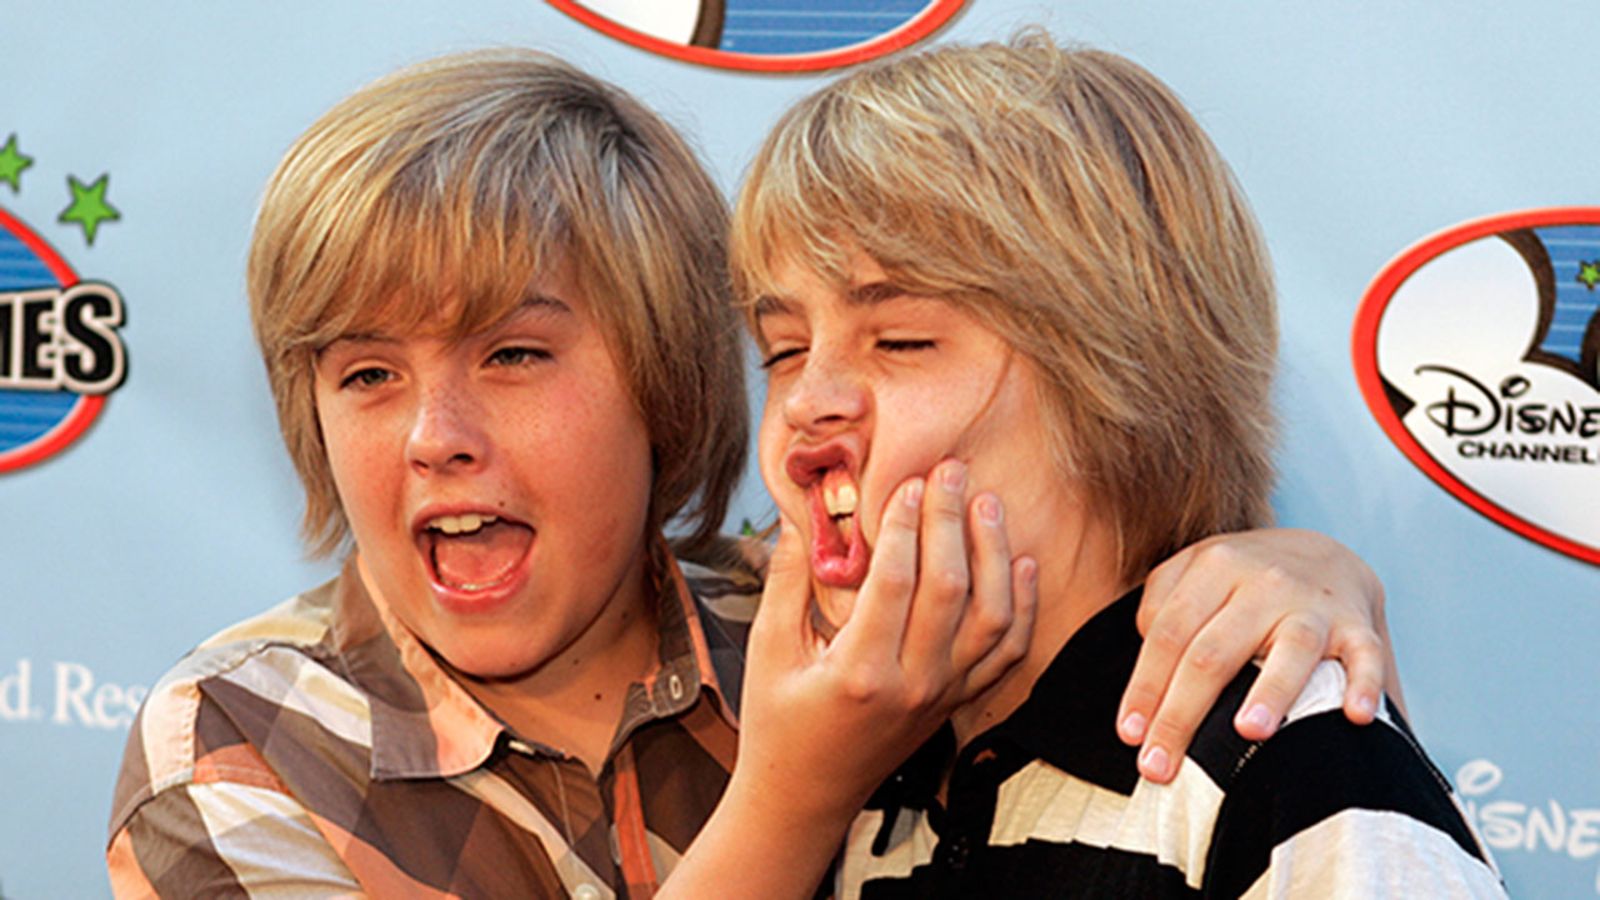 Suite Life of Zack and Cody' child stars Cole and Dylan Sprouse